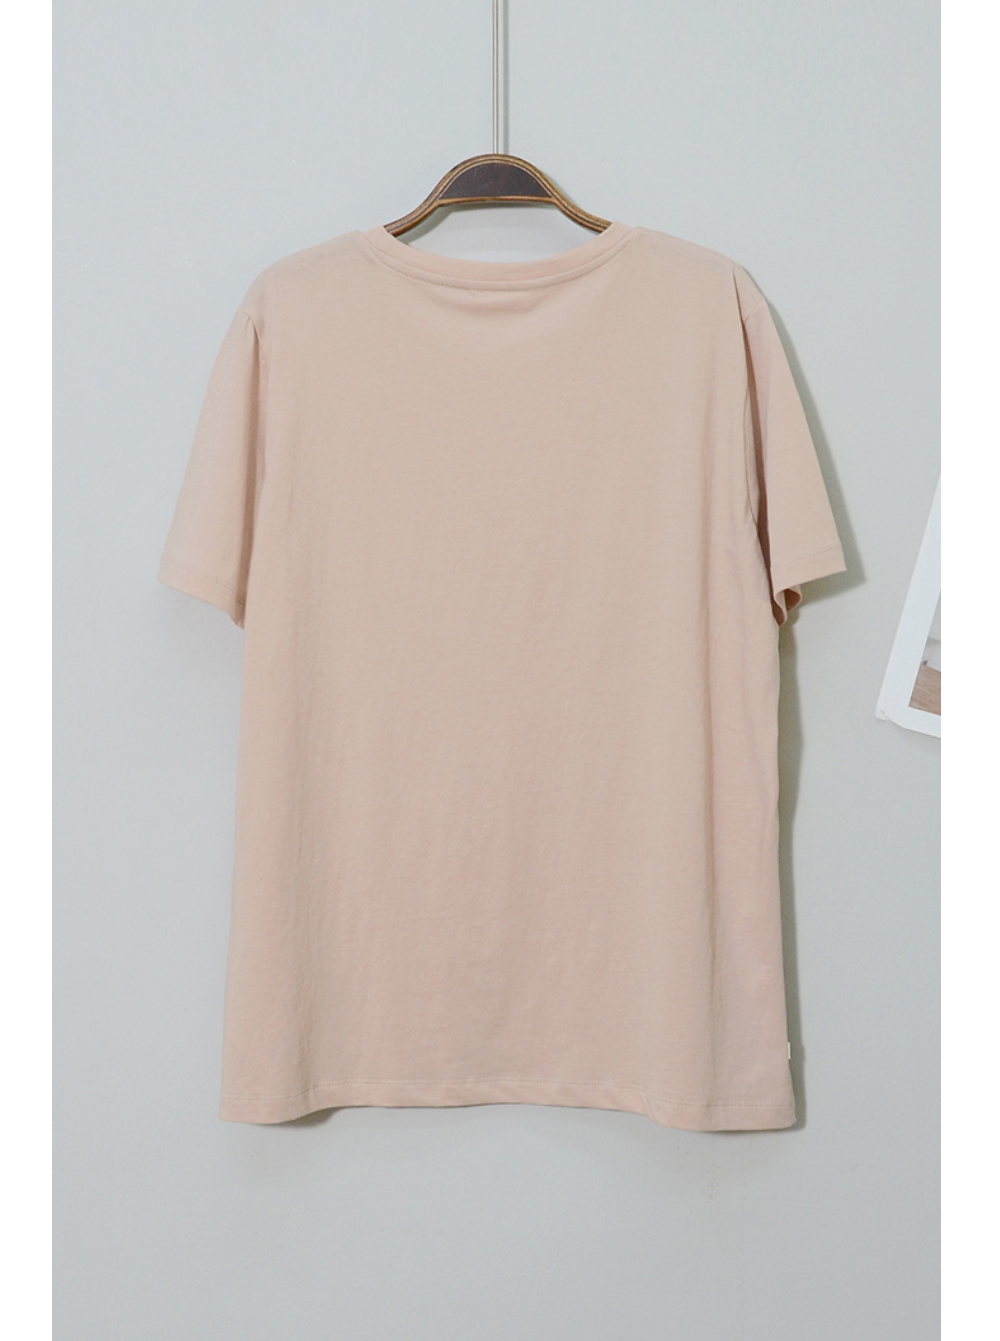 short sleeved tee cream color image-S1L41